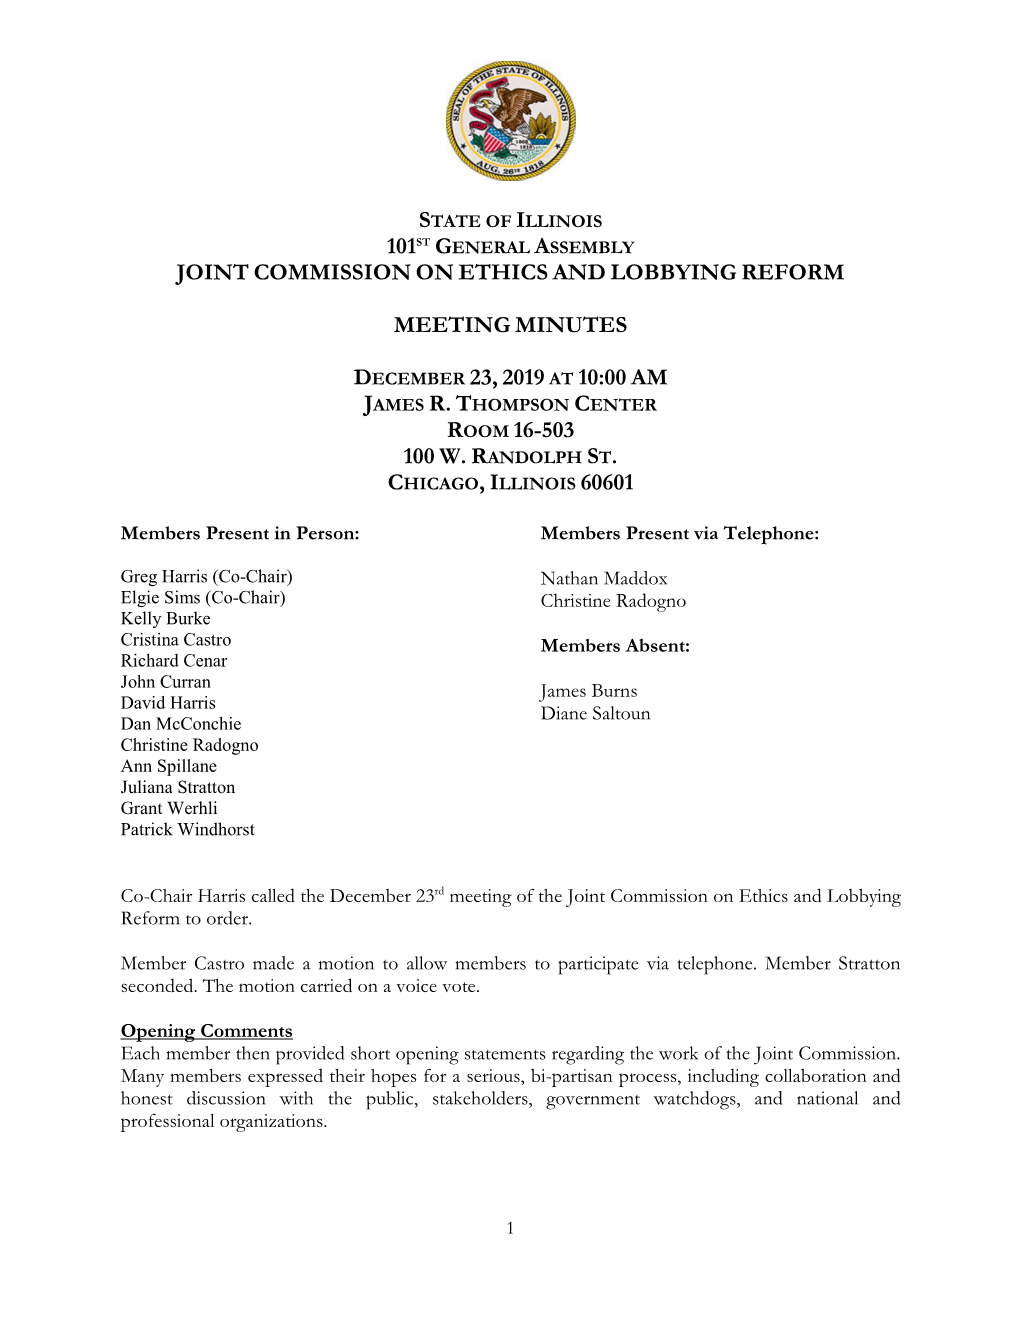 Joint Commission Minutes for December 23, 2019